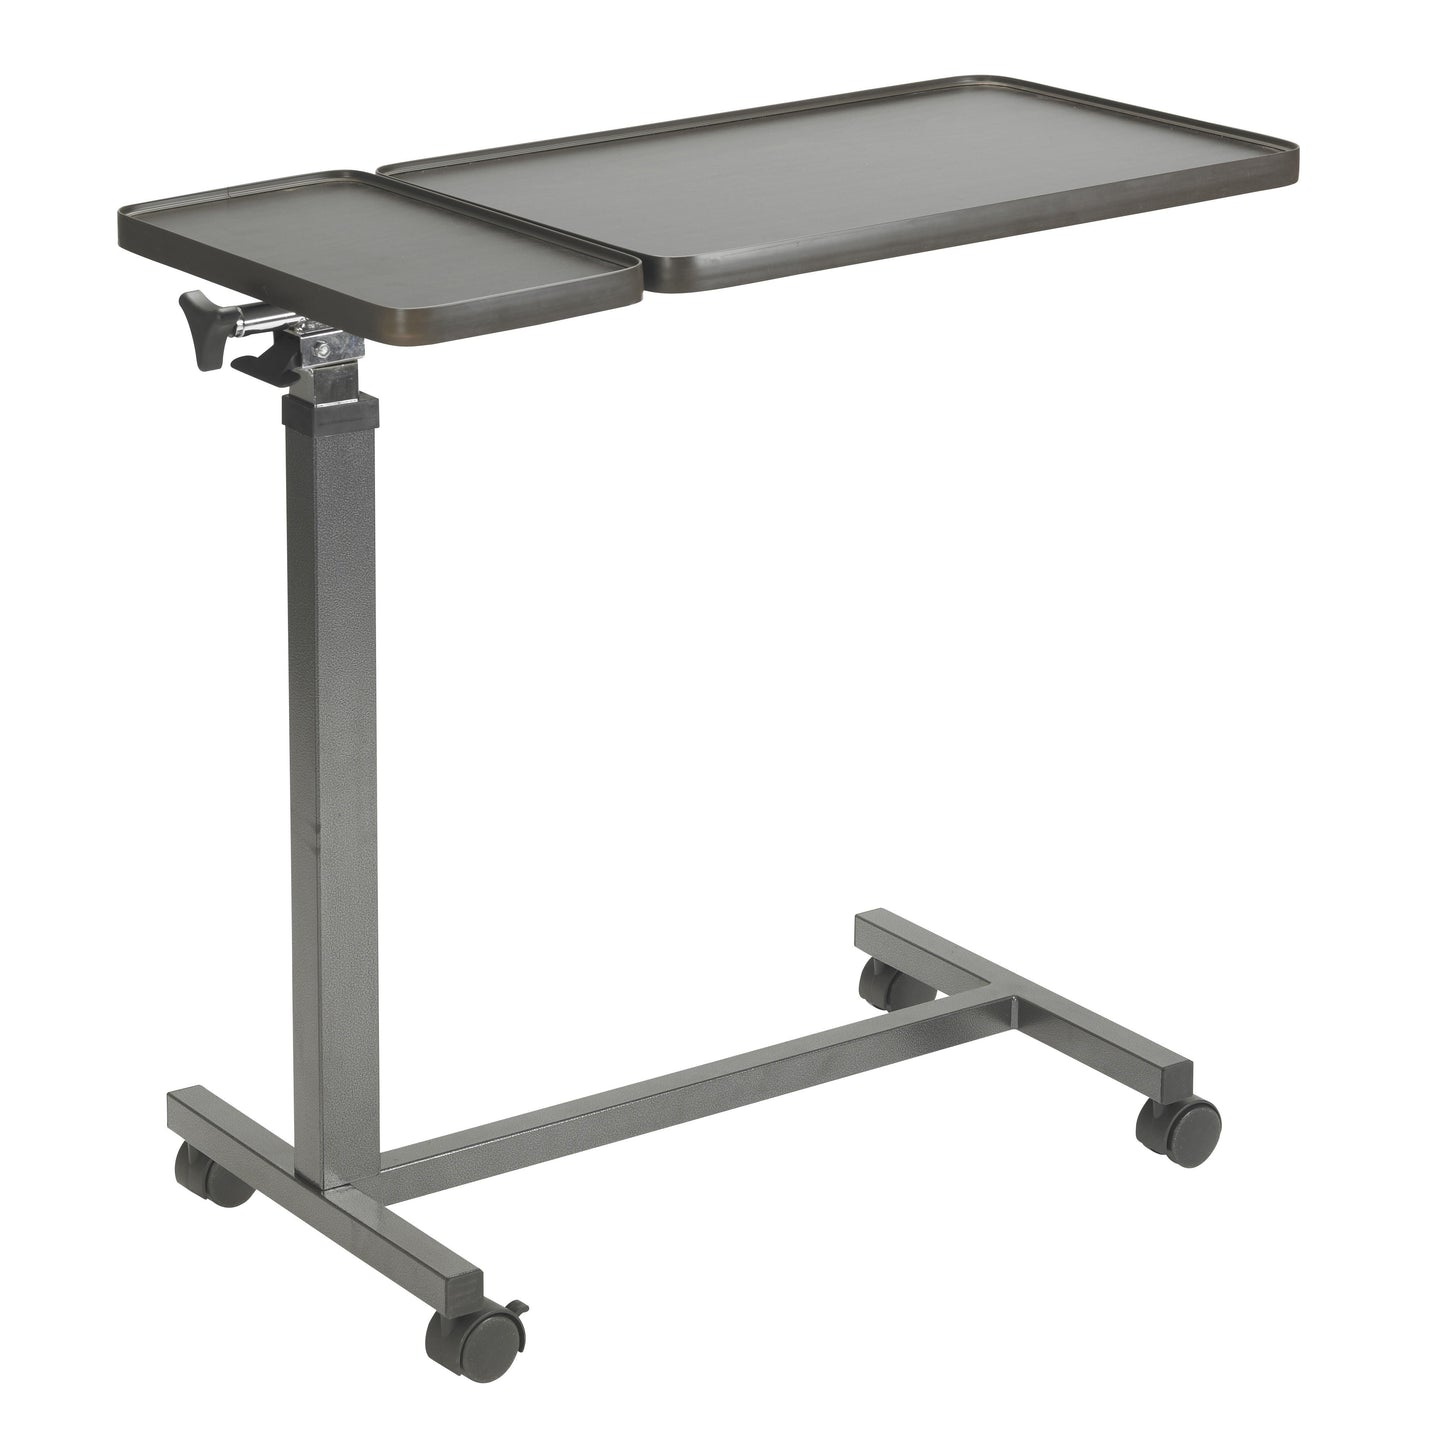 Multi-Purpose Tilt-Top Split Overbed Table with Tray